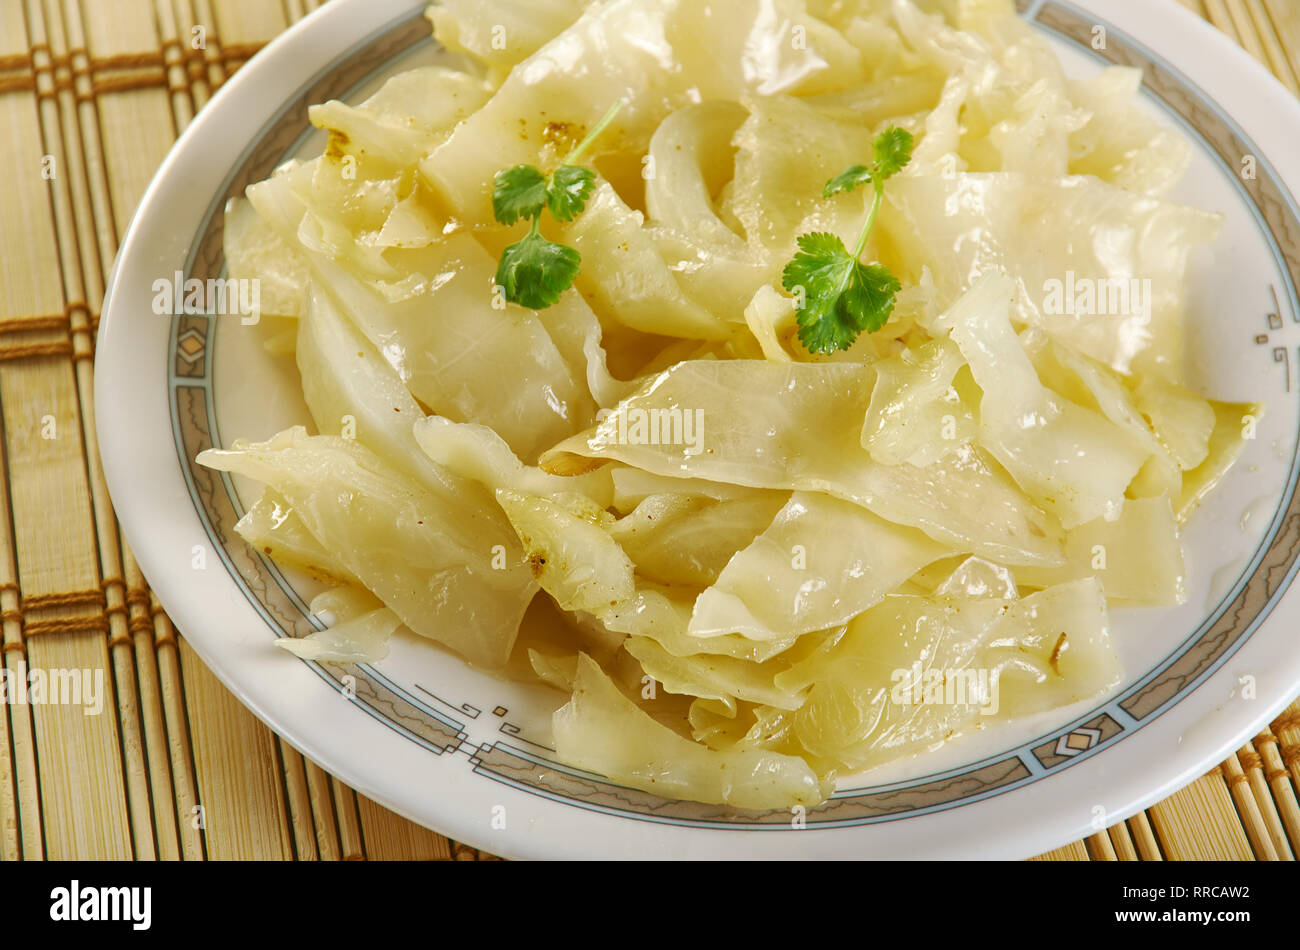 Bayrisch Kraut - Bavarian cabbage, shredded cabbage that is cooked in beef stock with pork lard, onion, apples, and seasoned with vinegar Stock Photo